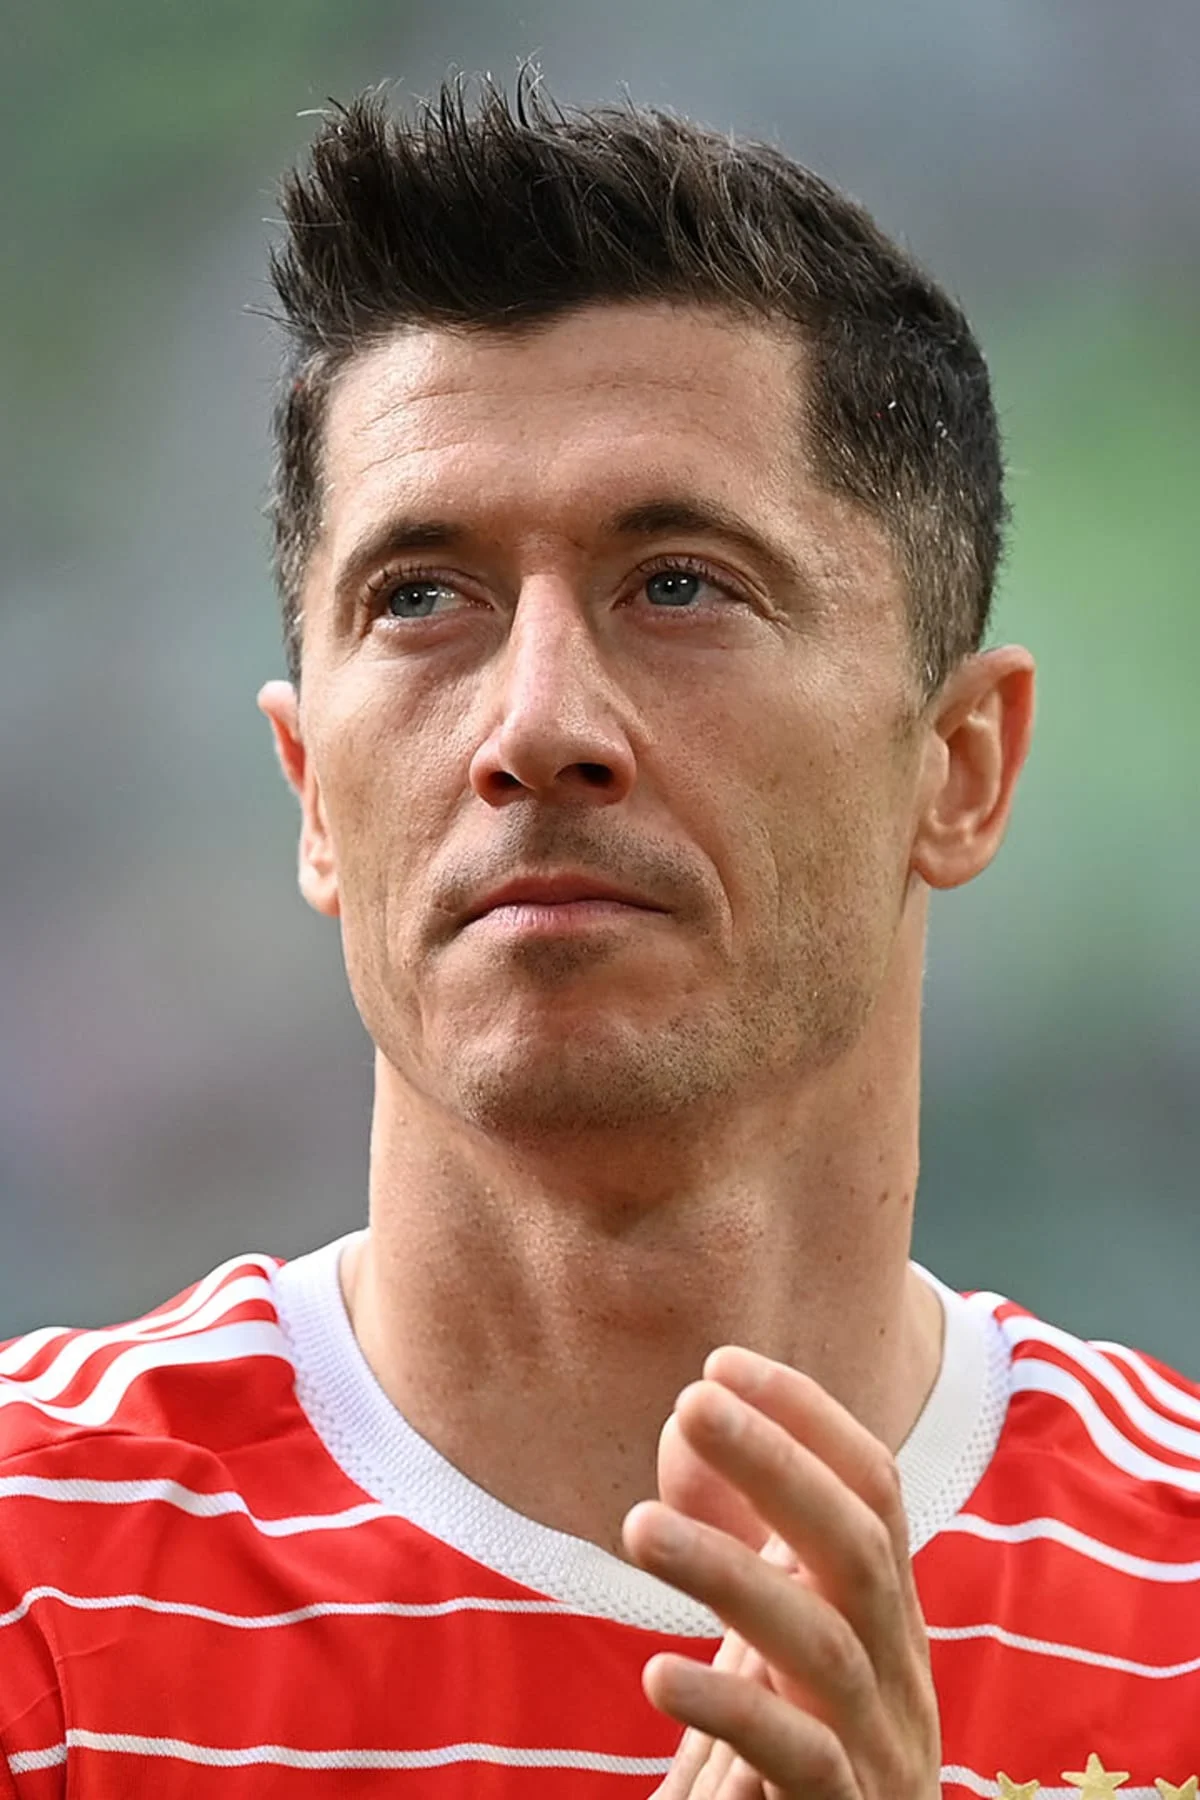 Two EPL clubs interested in signing Lewandowski